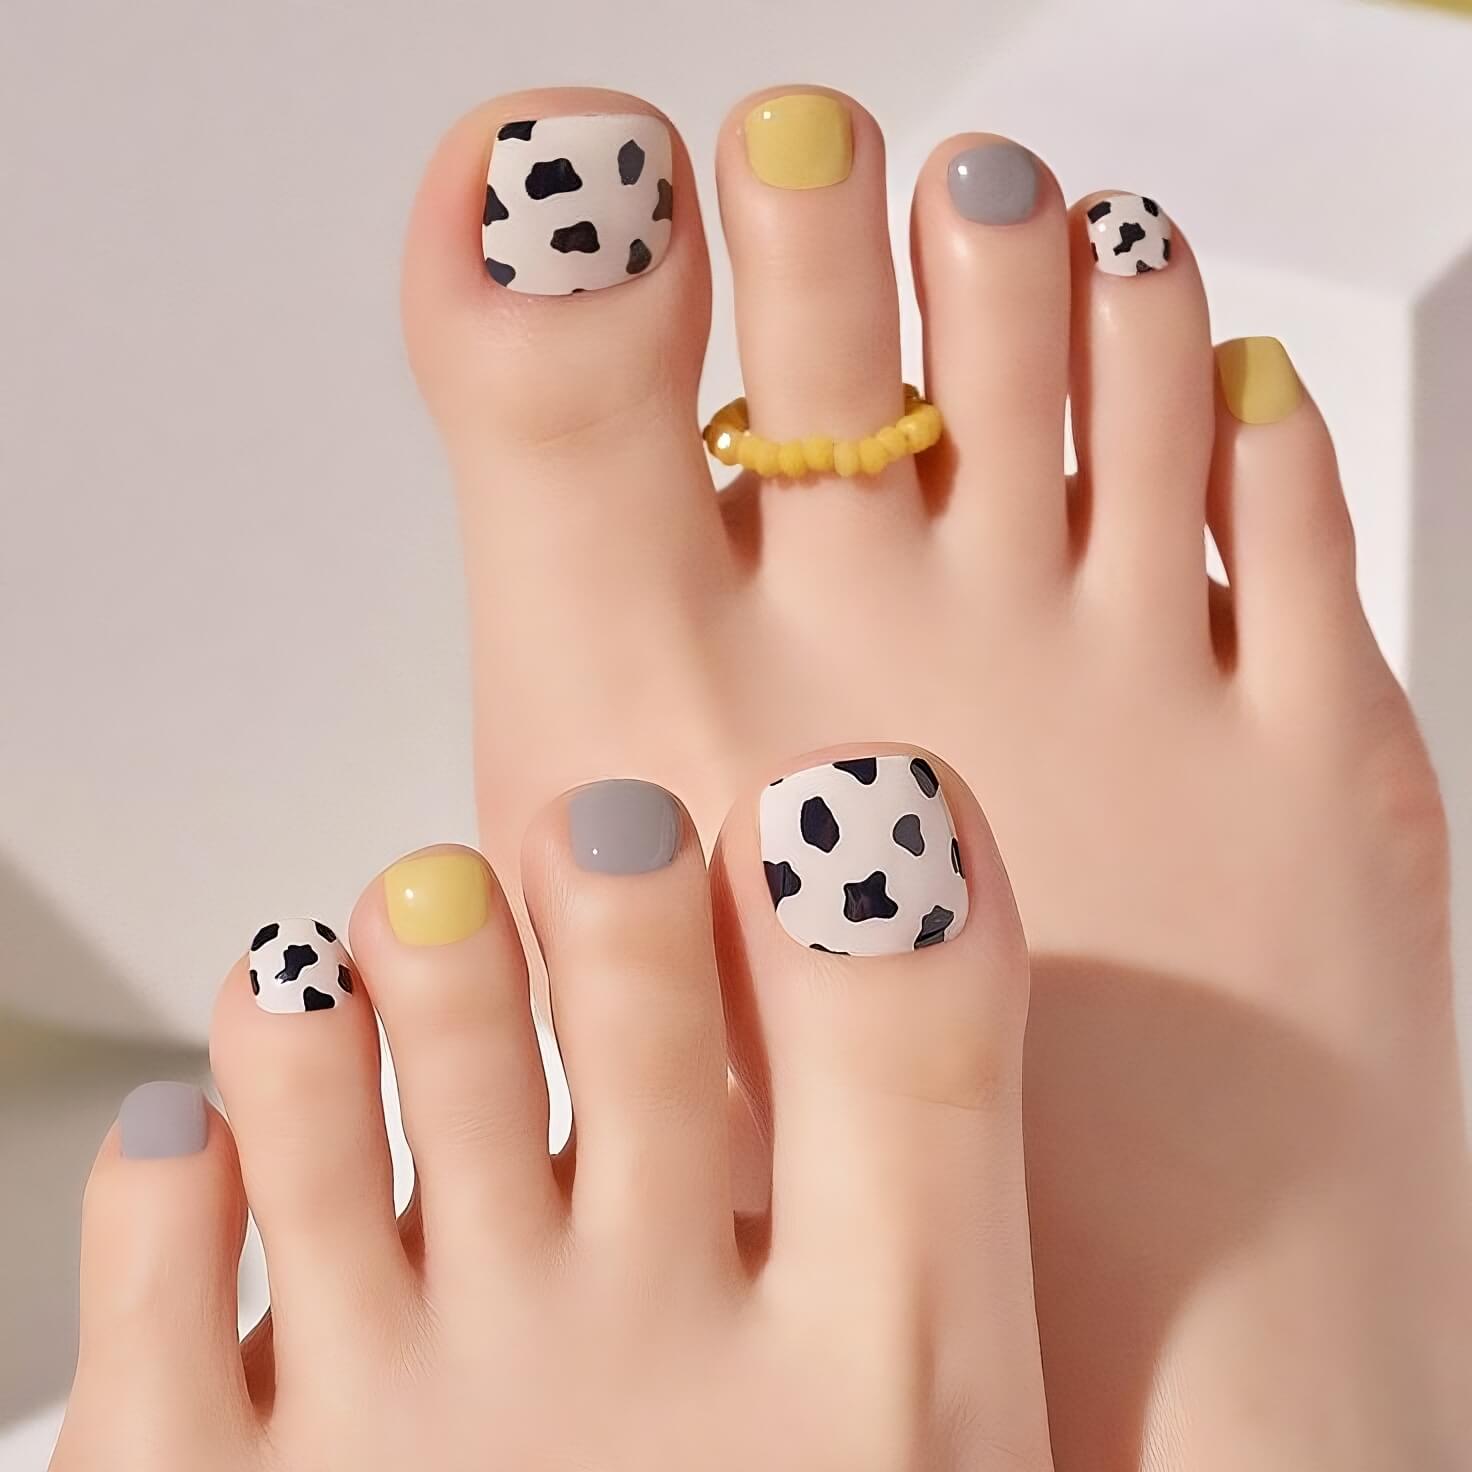 35 Charming Toenail Designs to Brighten Your Day – The Daily Worlds